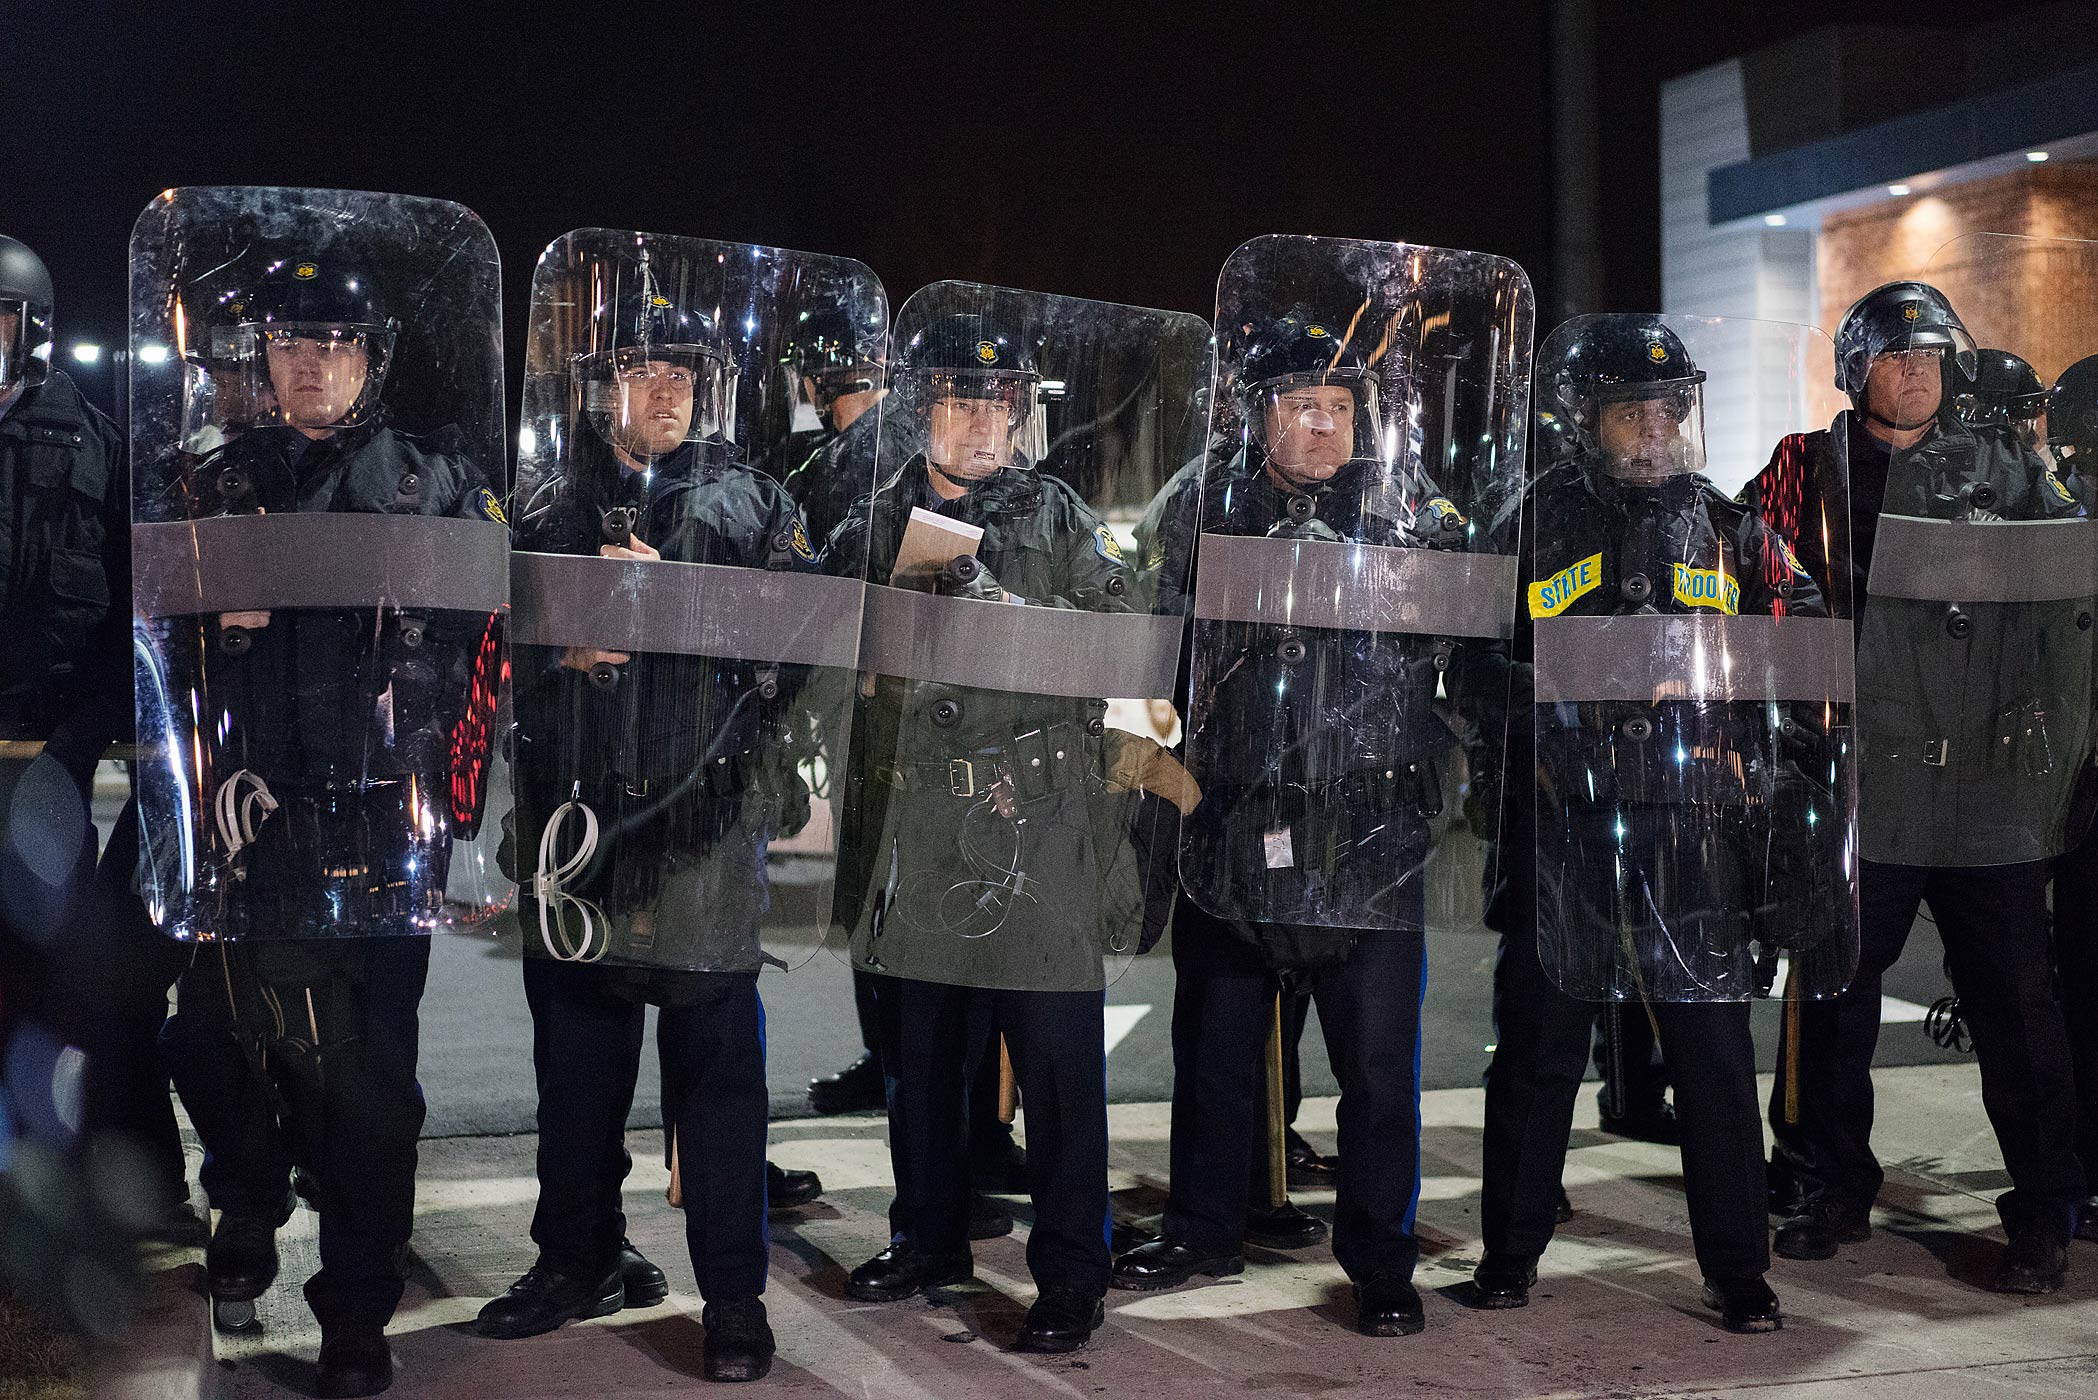 Police officers in riot gear stand guard in Ferguson, Mo. on Nov. 24, 2014 (Barrett Emke for TIME)